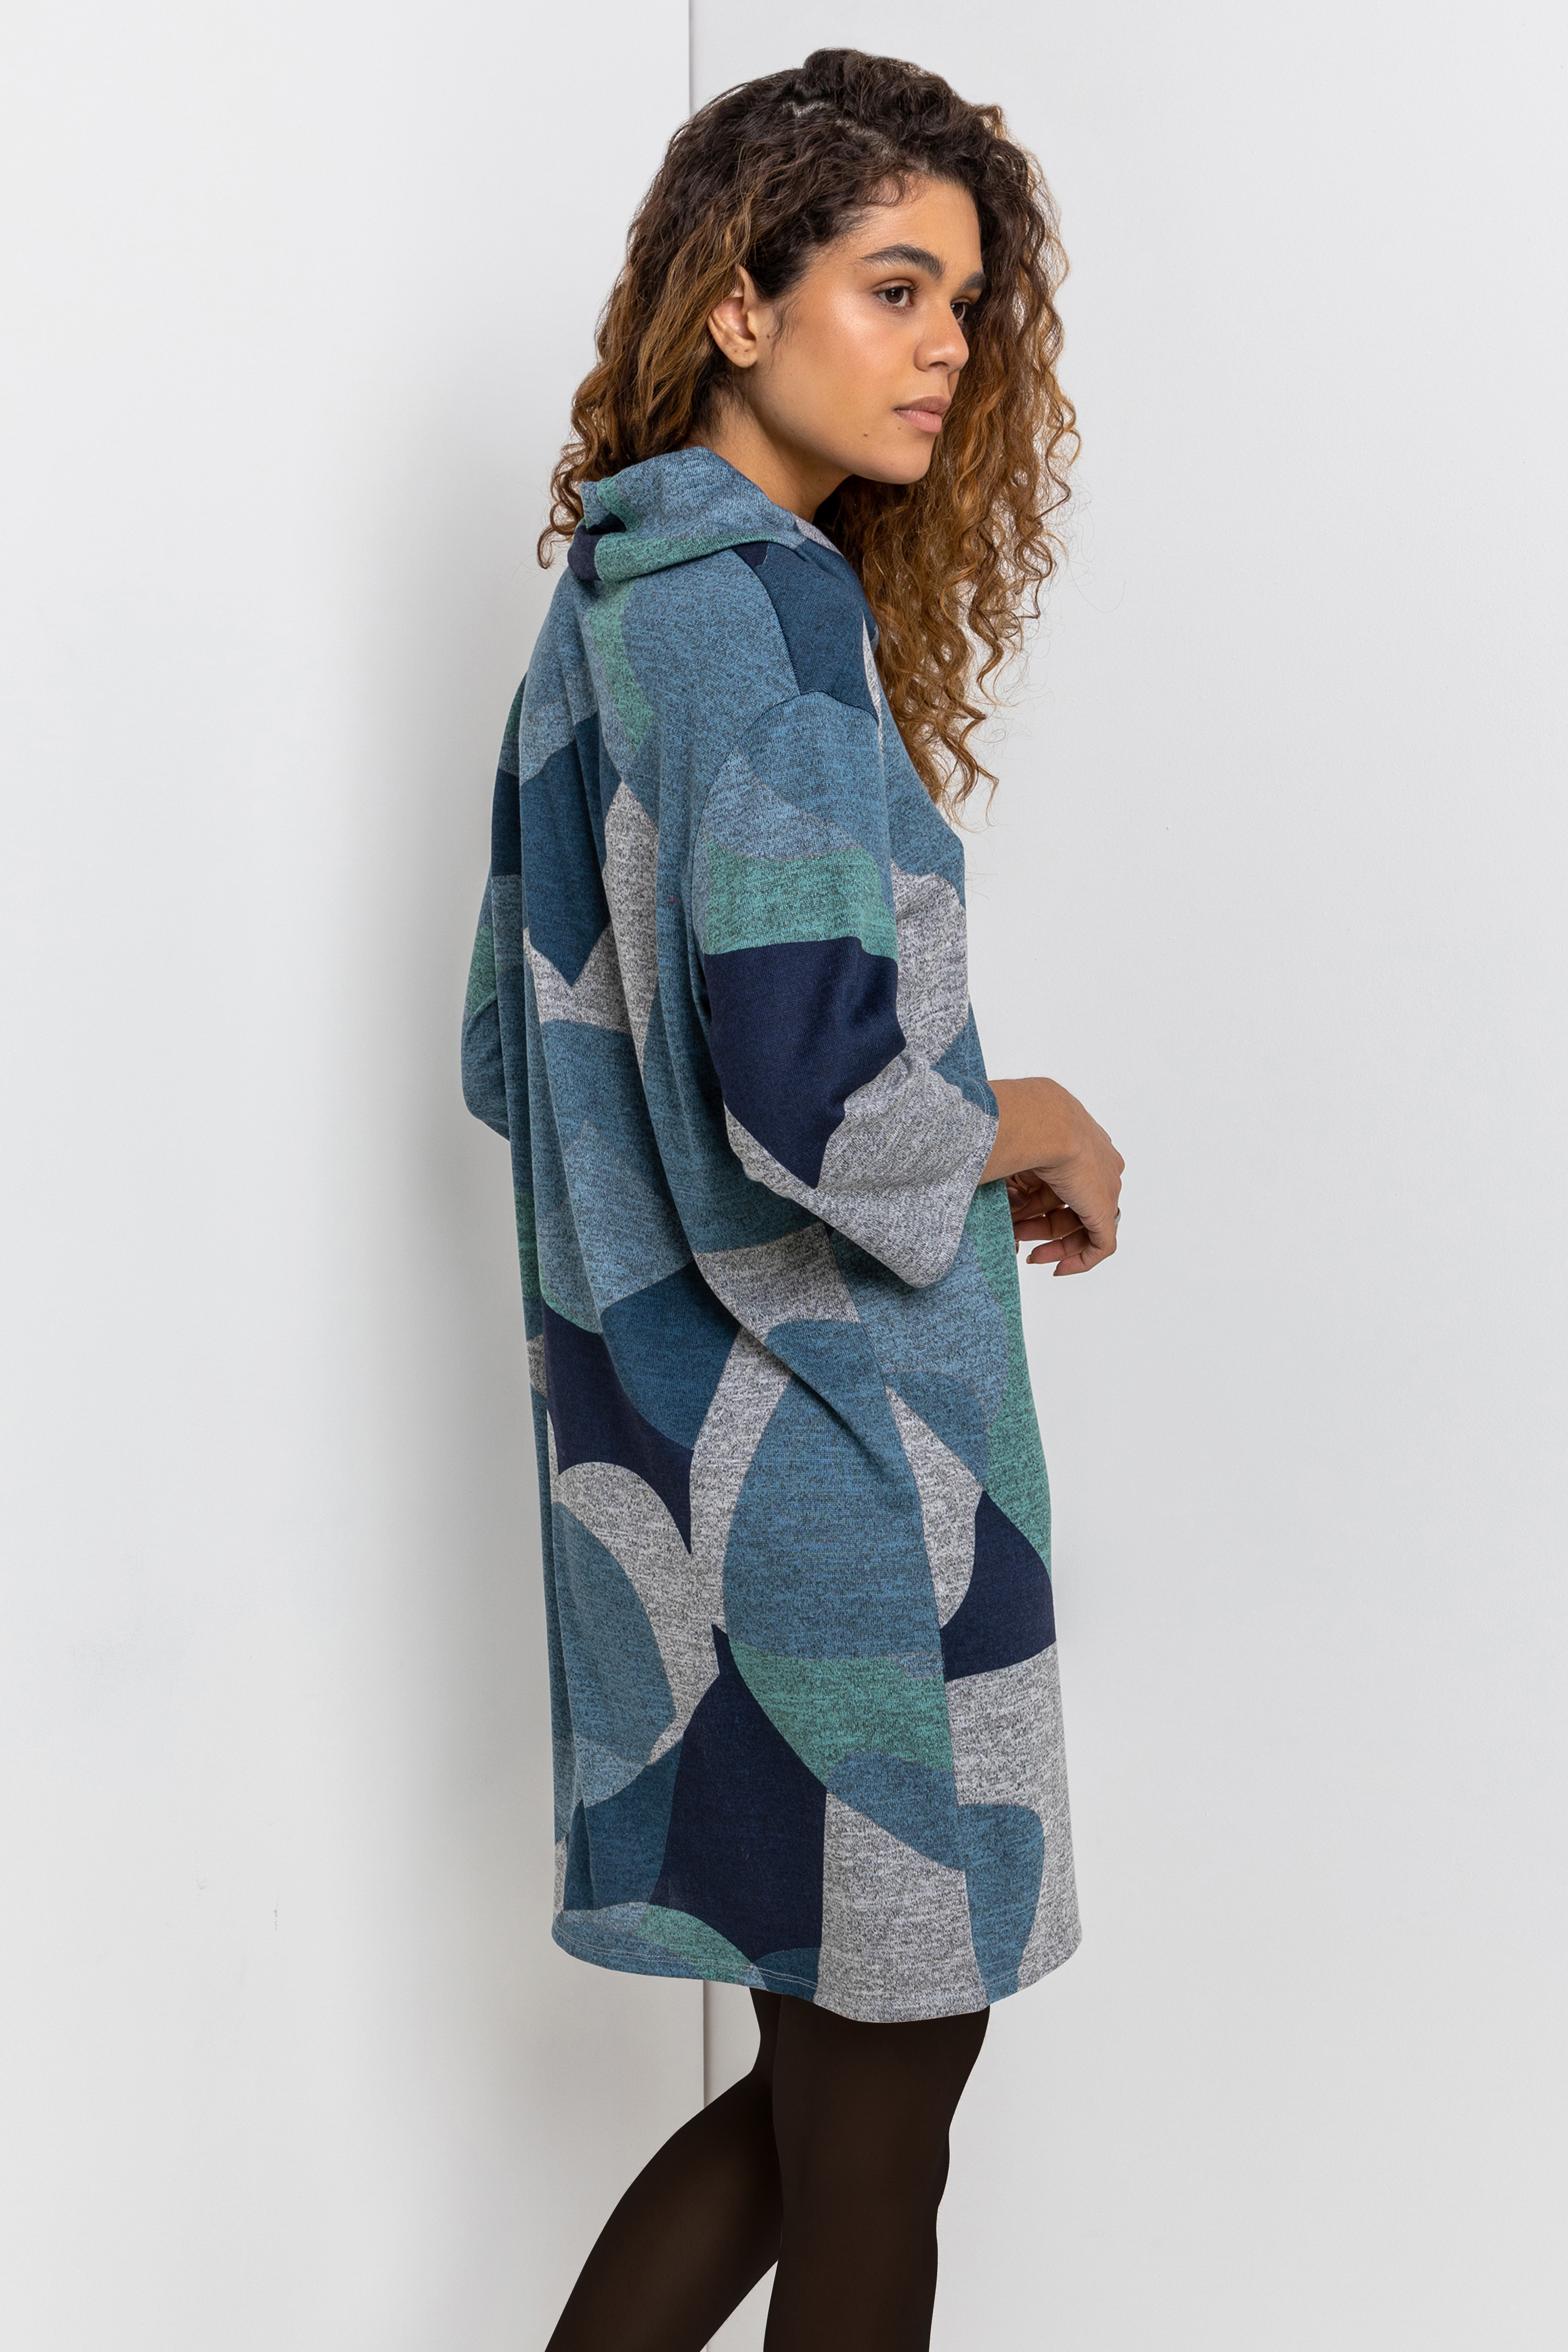 Blue Abstract Print Cowl Neck Dress, Image 2 of 4